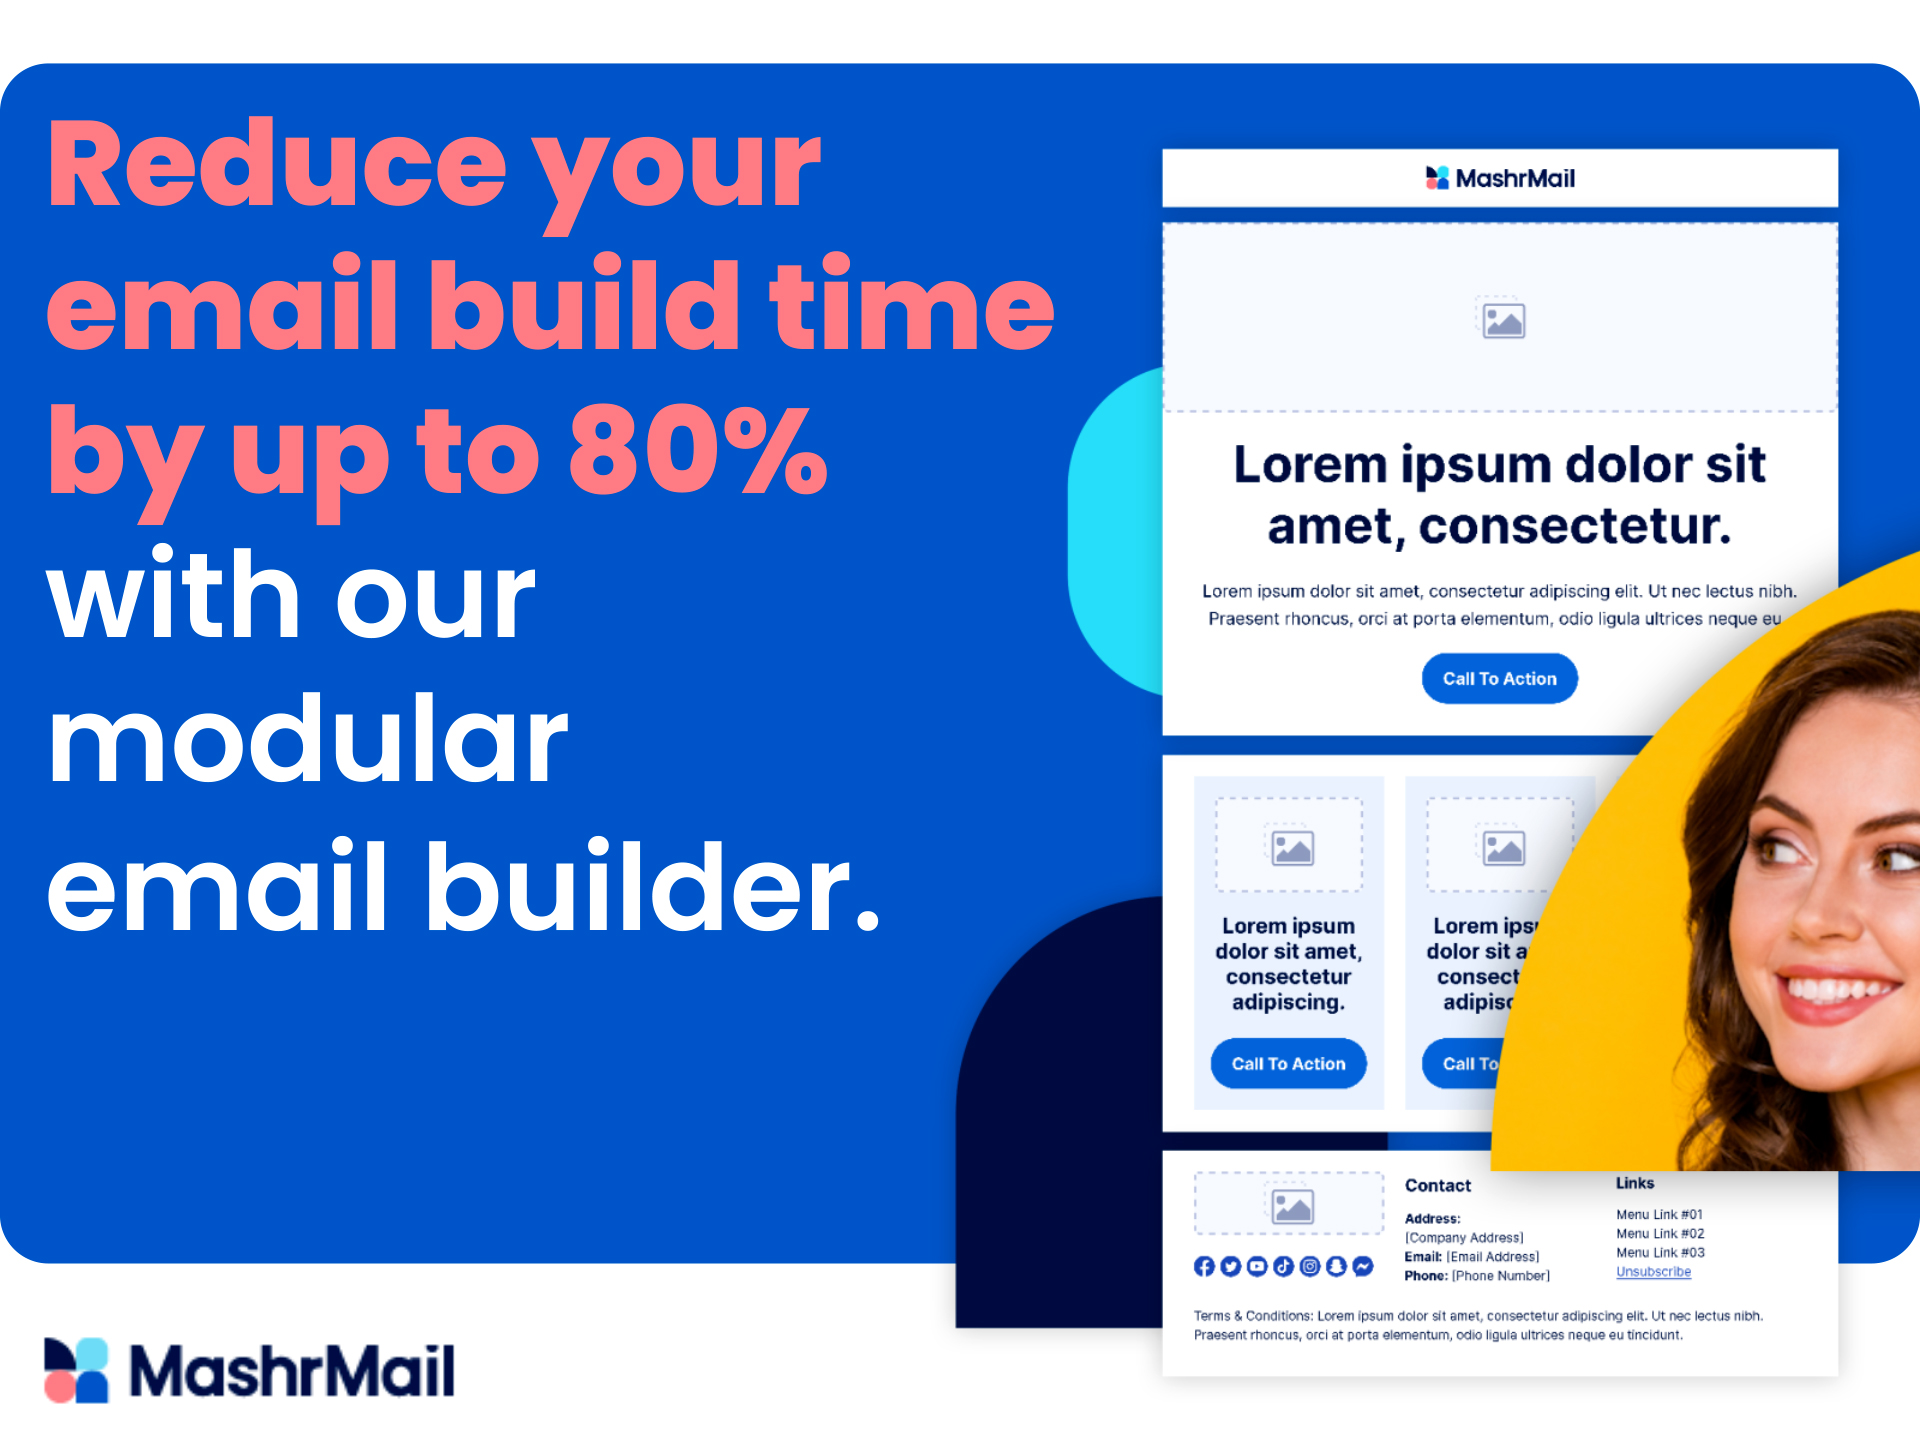 Reduce your email build time by up to 80% with our modular email builder.